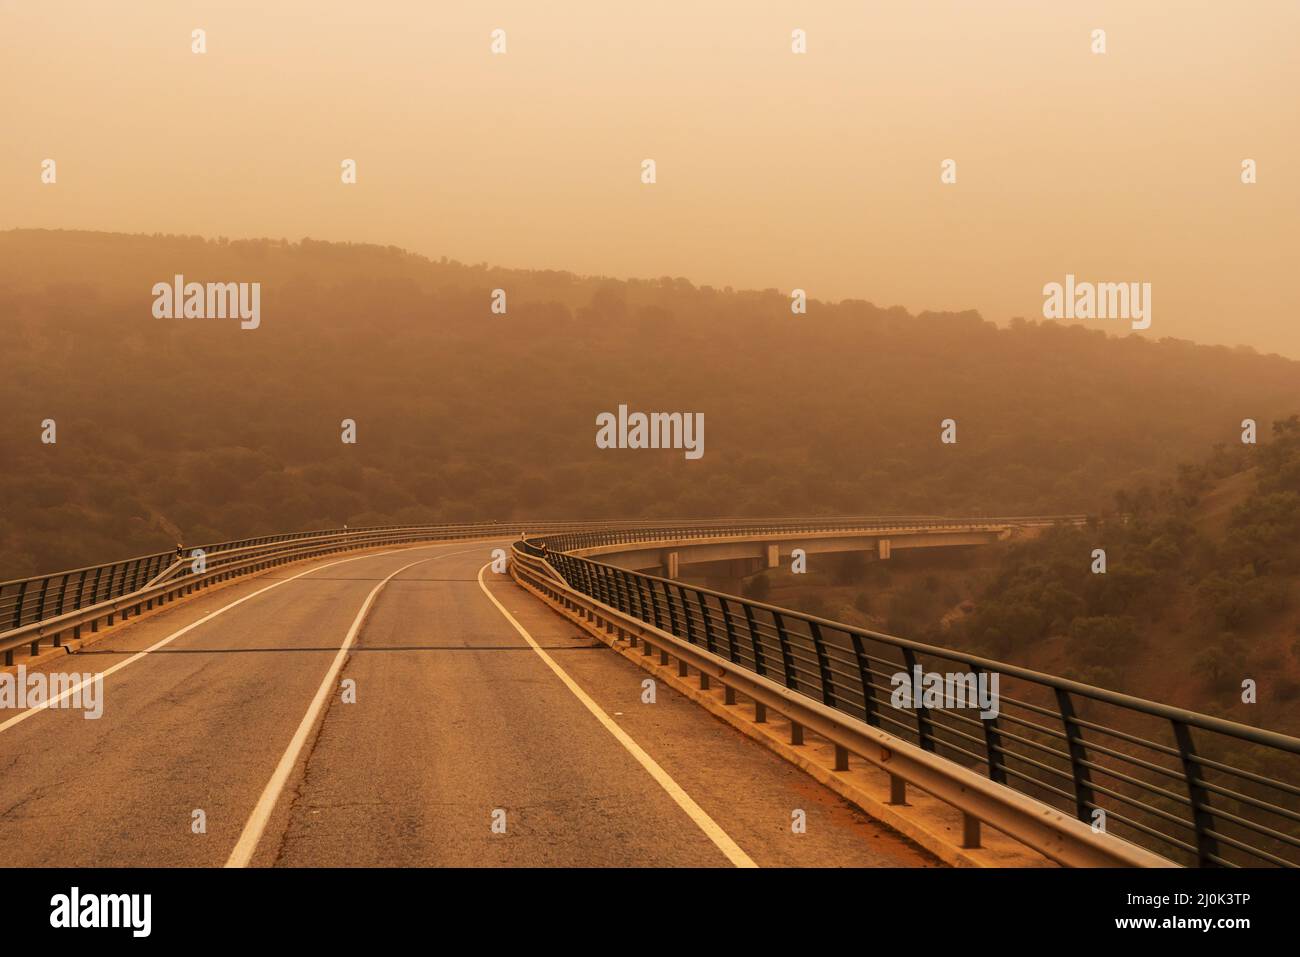 Viaduct between mountains with a lot of saharan dust in the environment (calima) Stock Photo